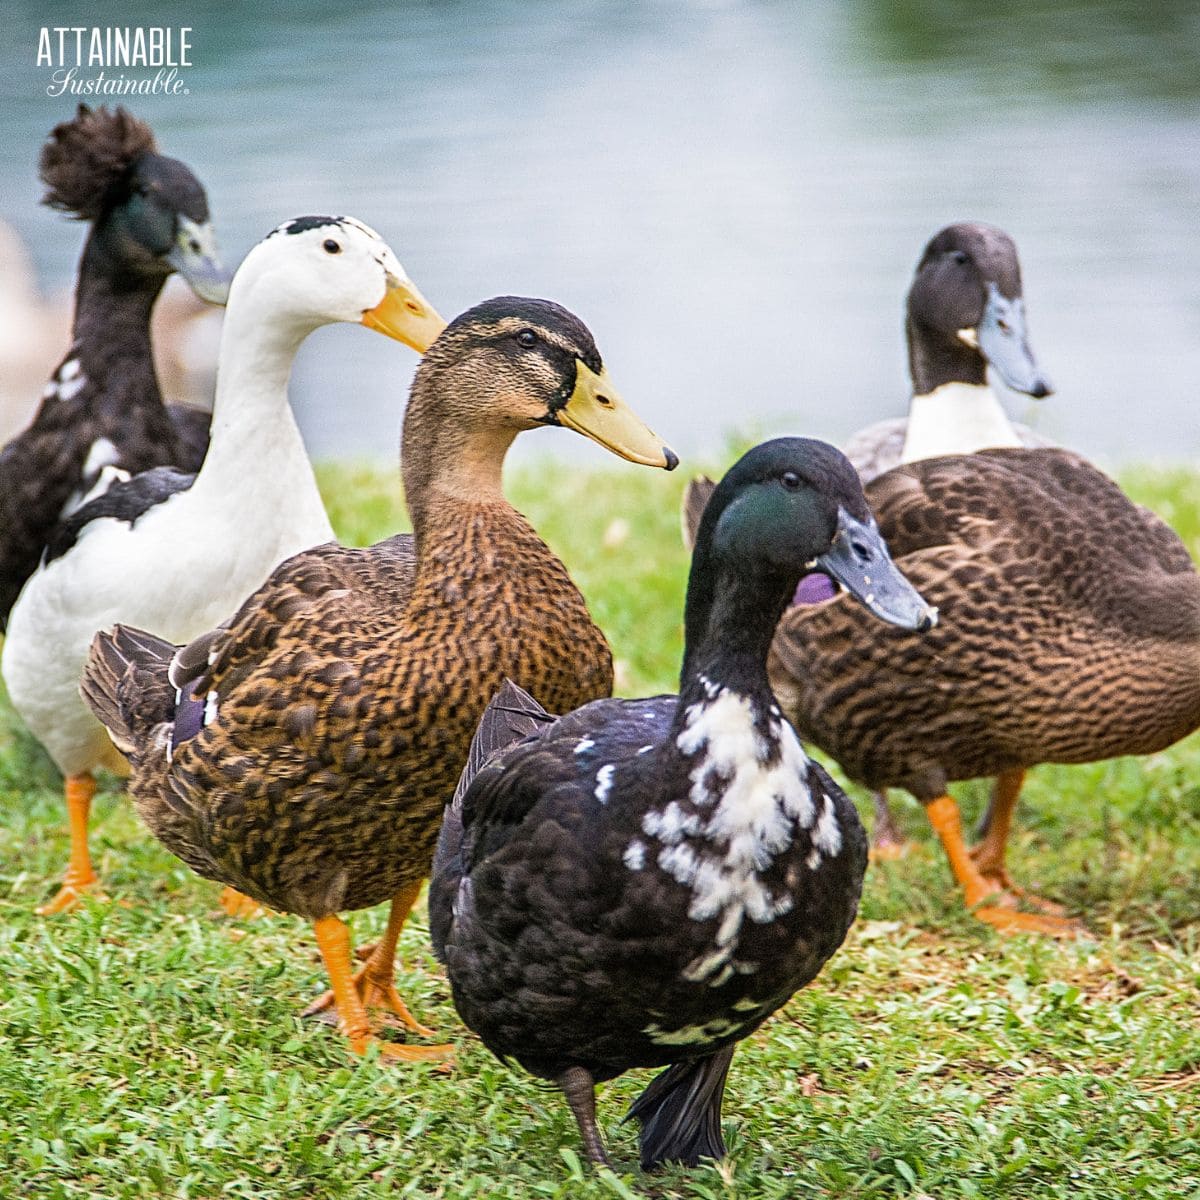 various breeds of ducks at a grassy edge of a pond.